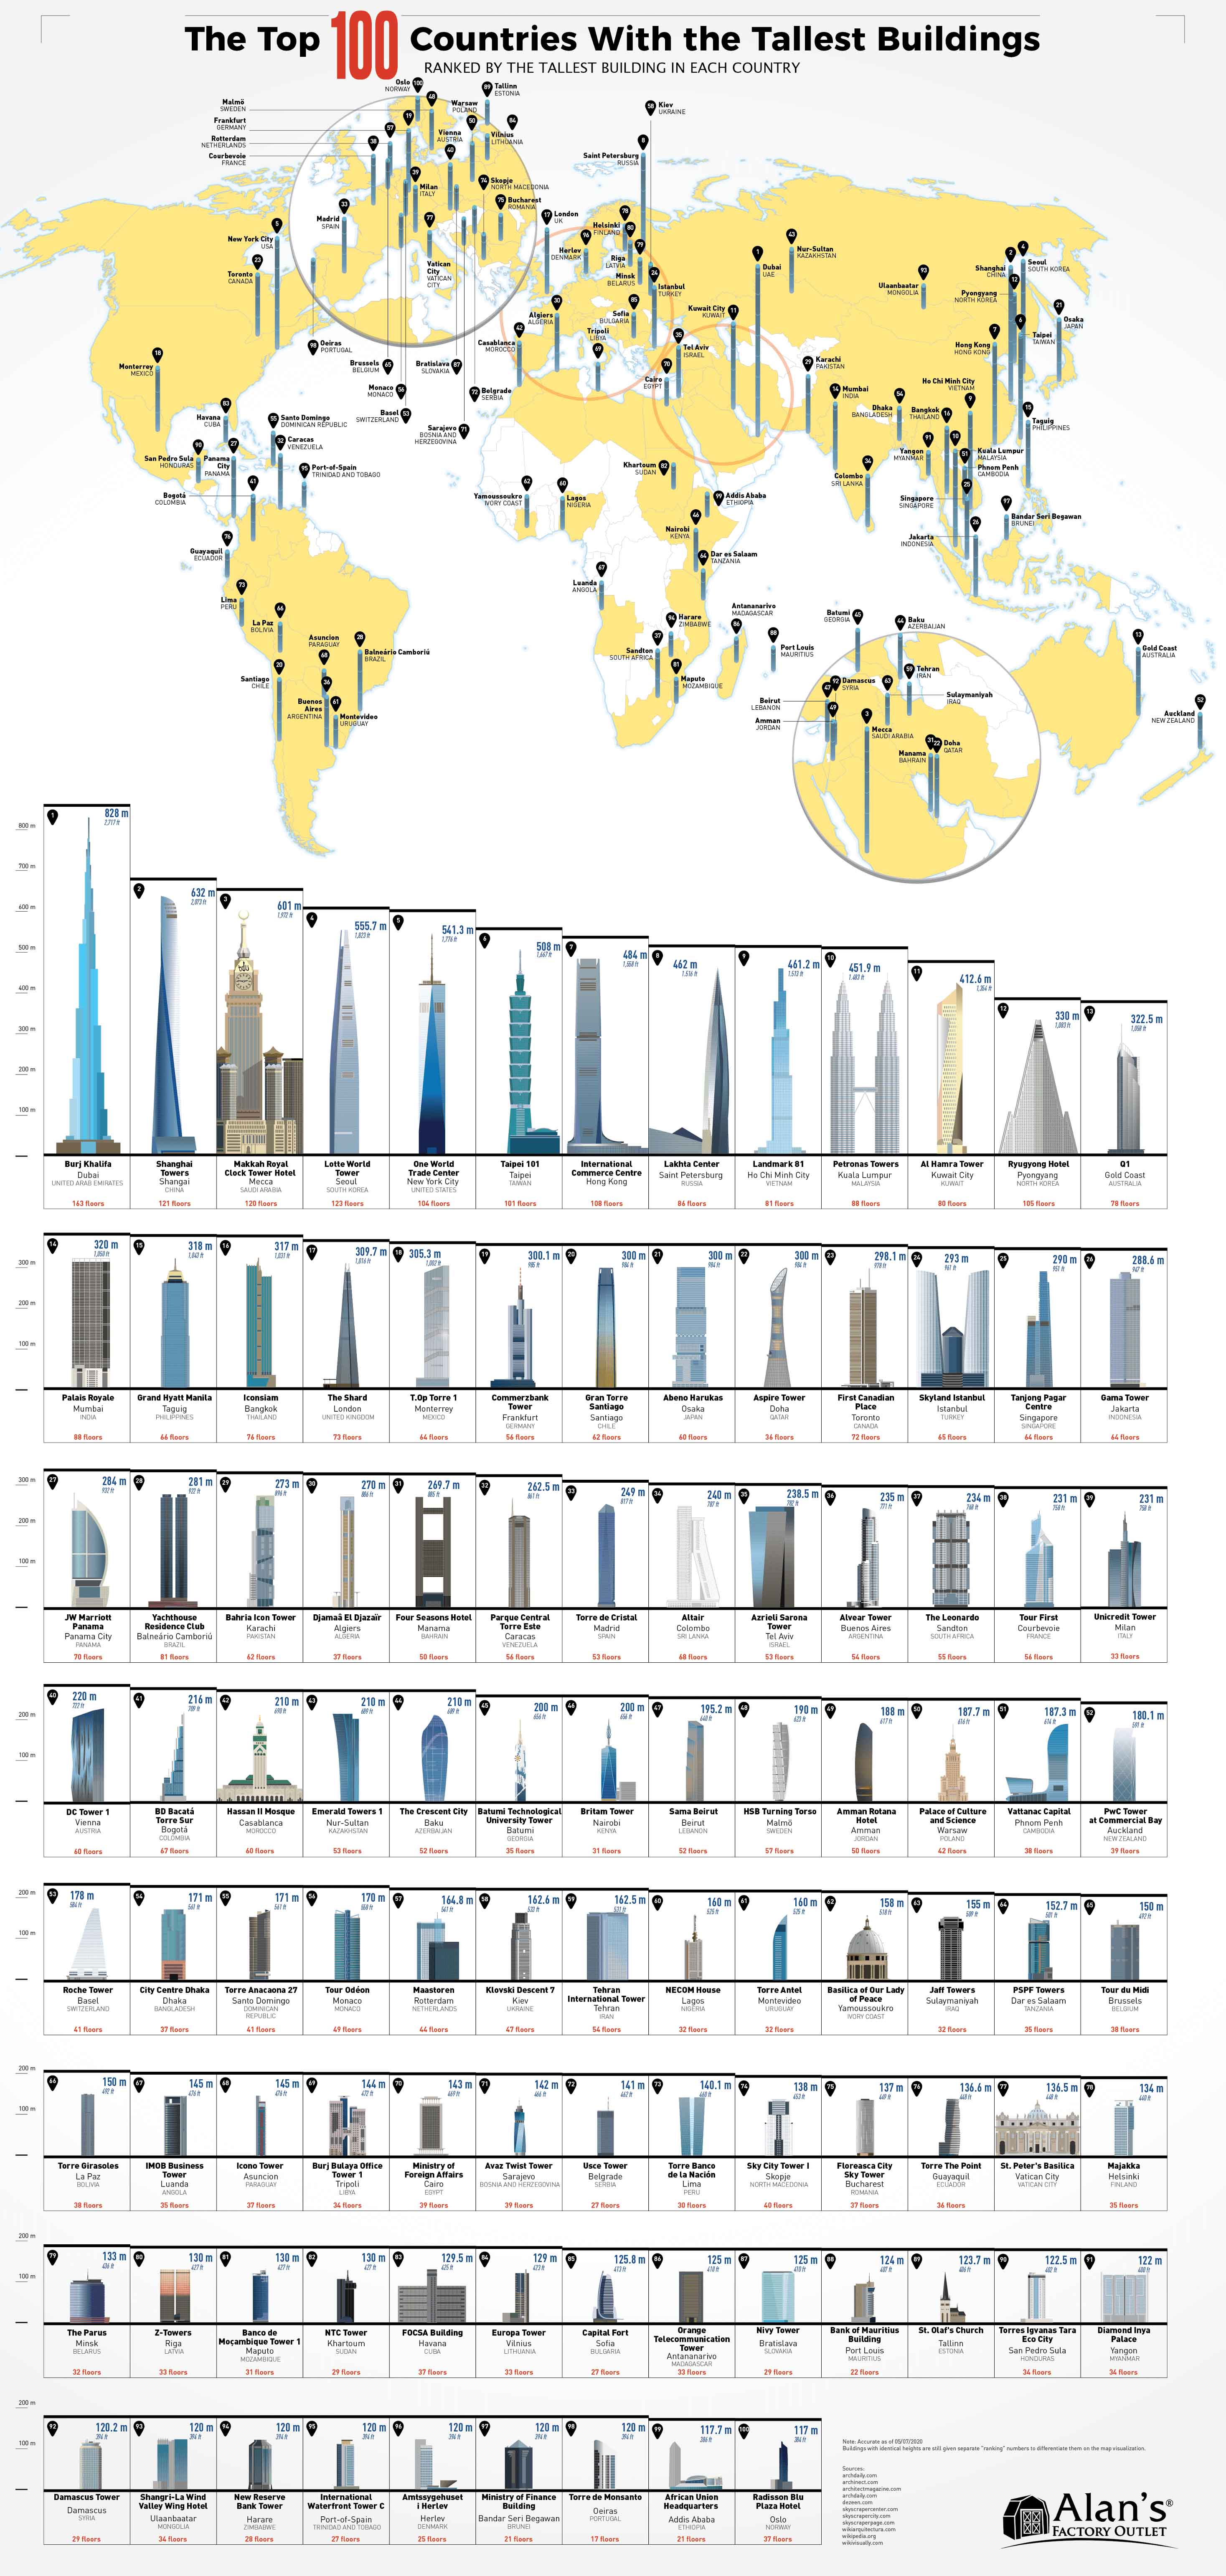 The Top 100 Countries With the Tallest Buildings